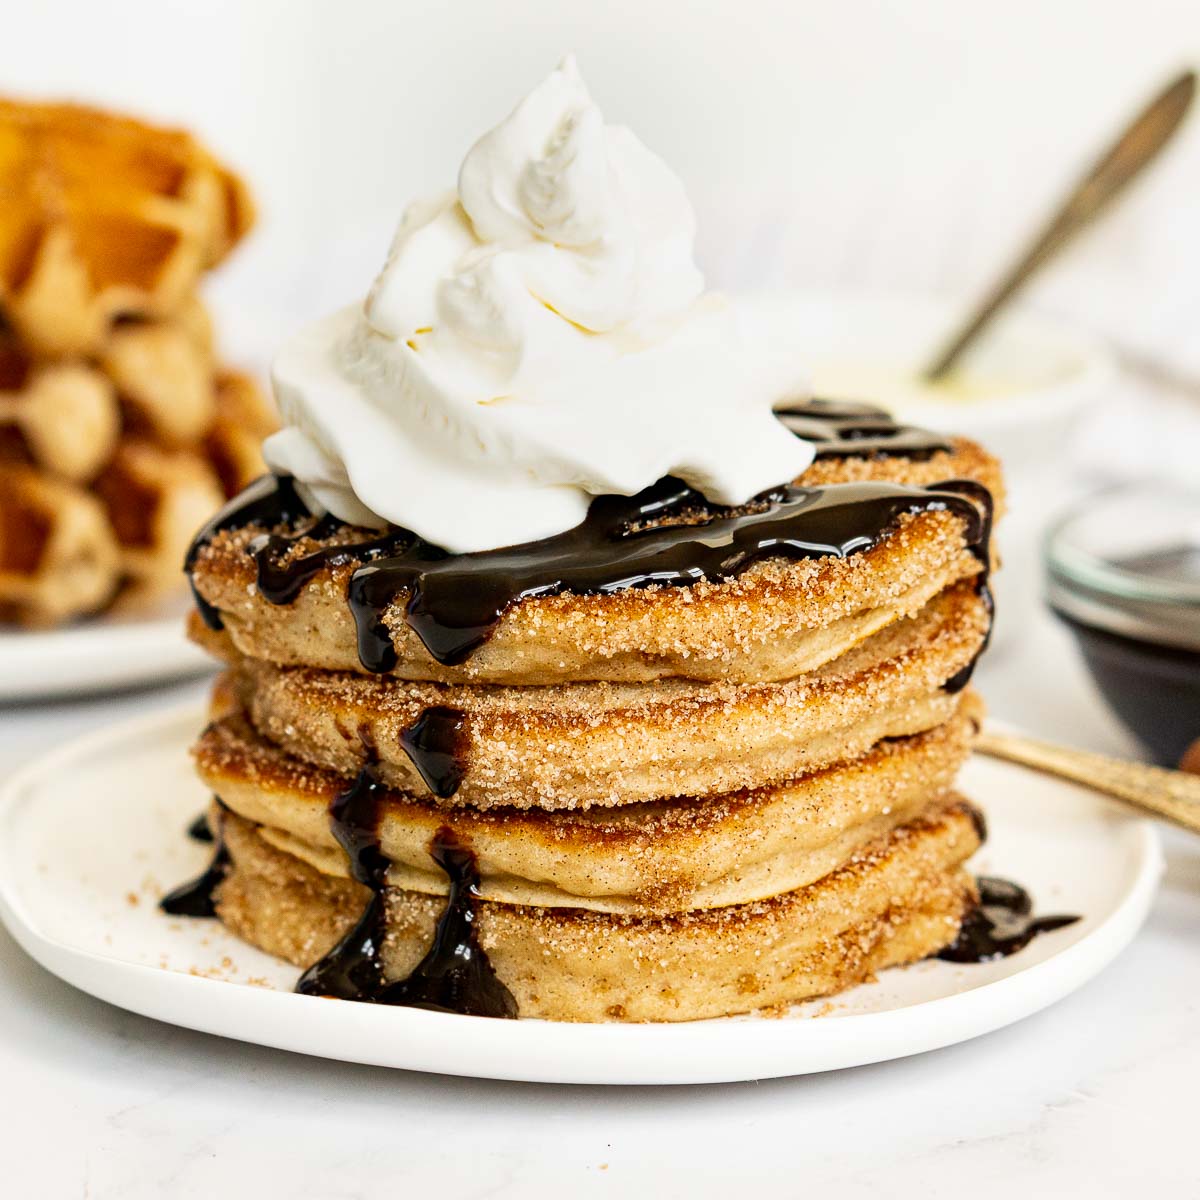 Churro pancakes with chocolate sauce and whipped cream